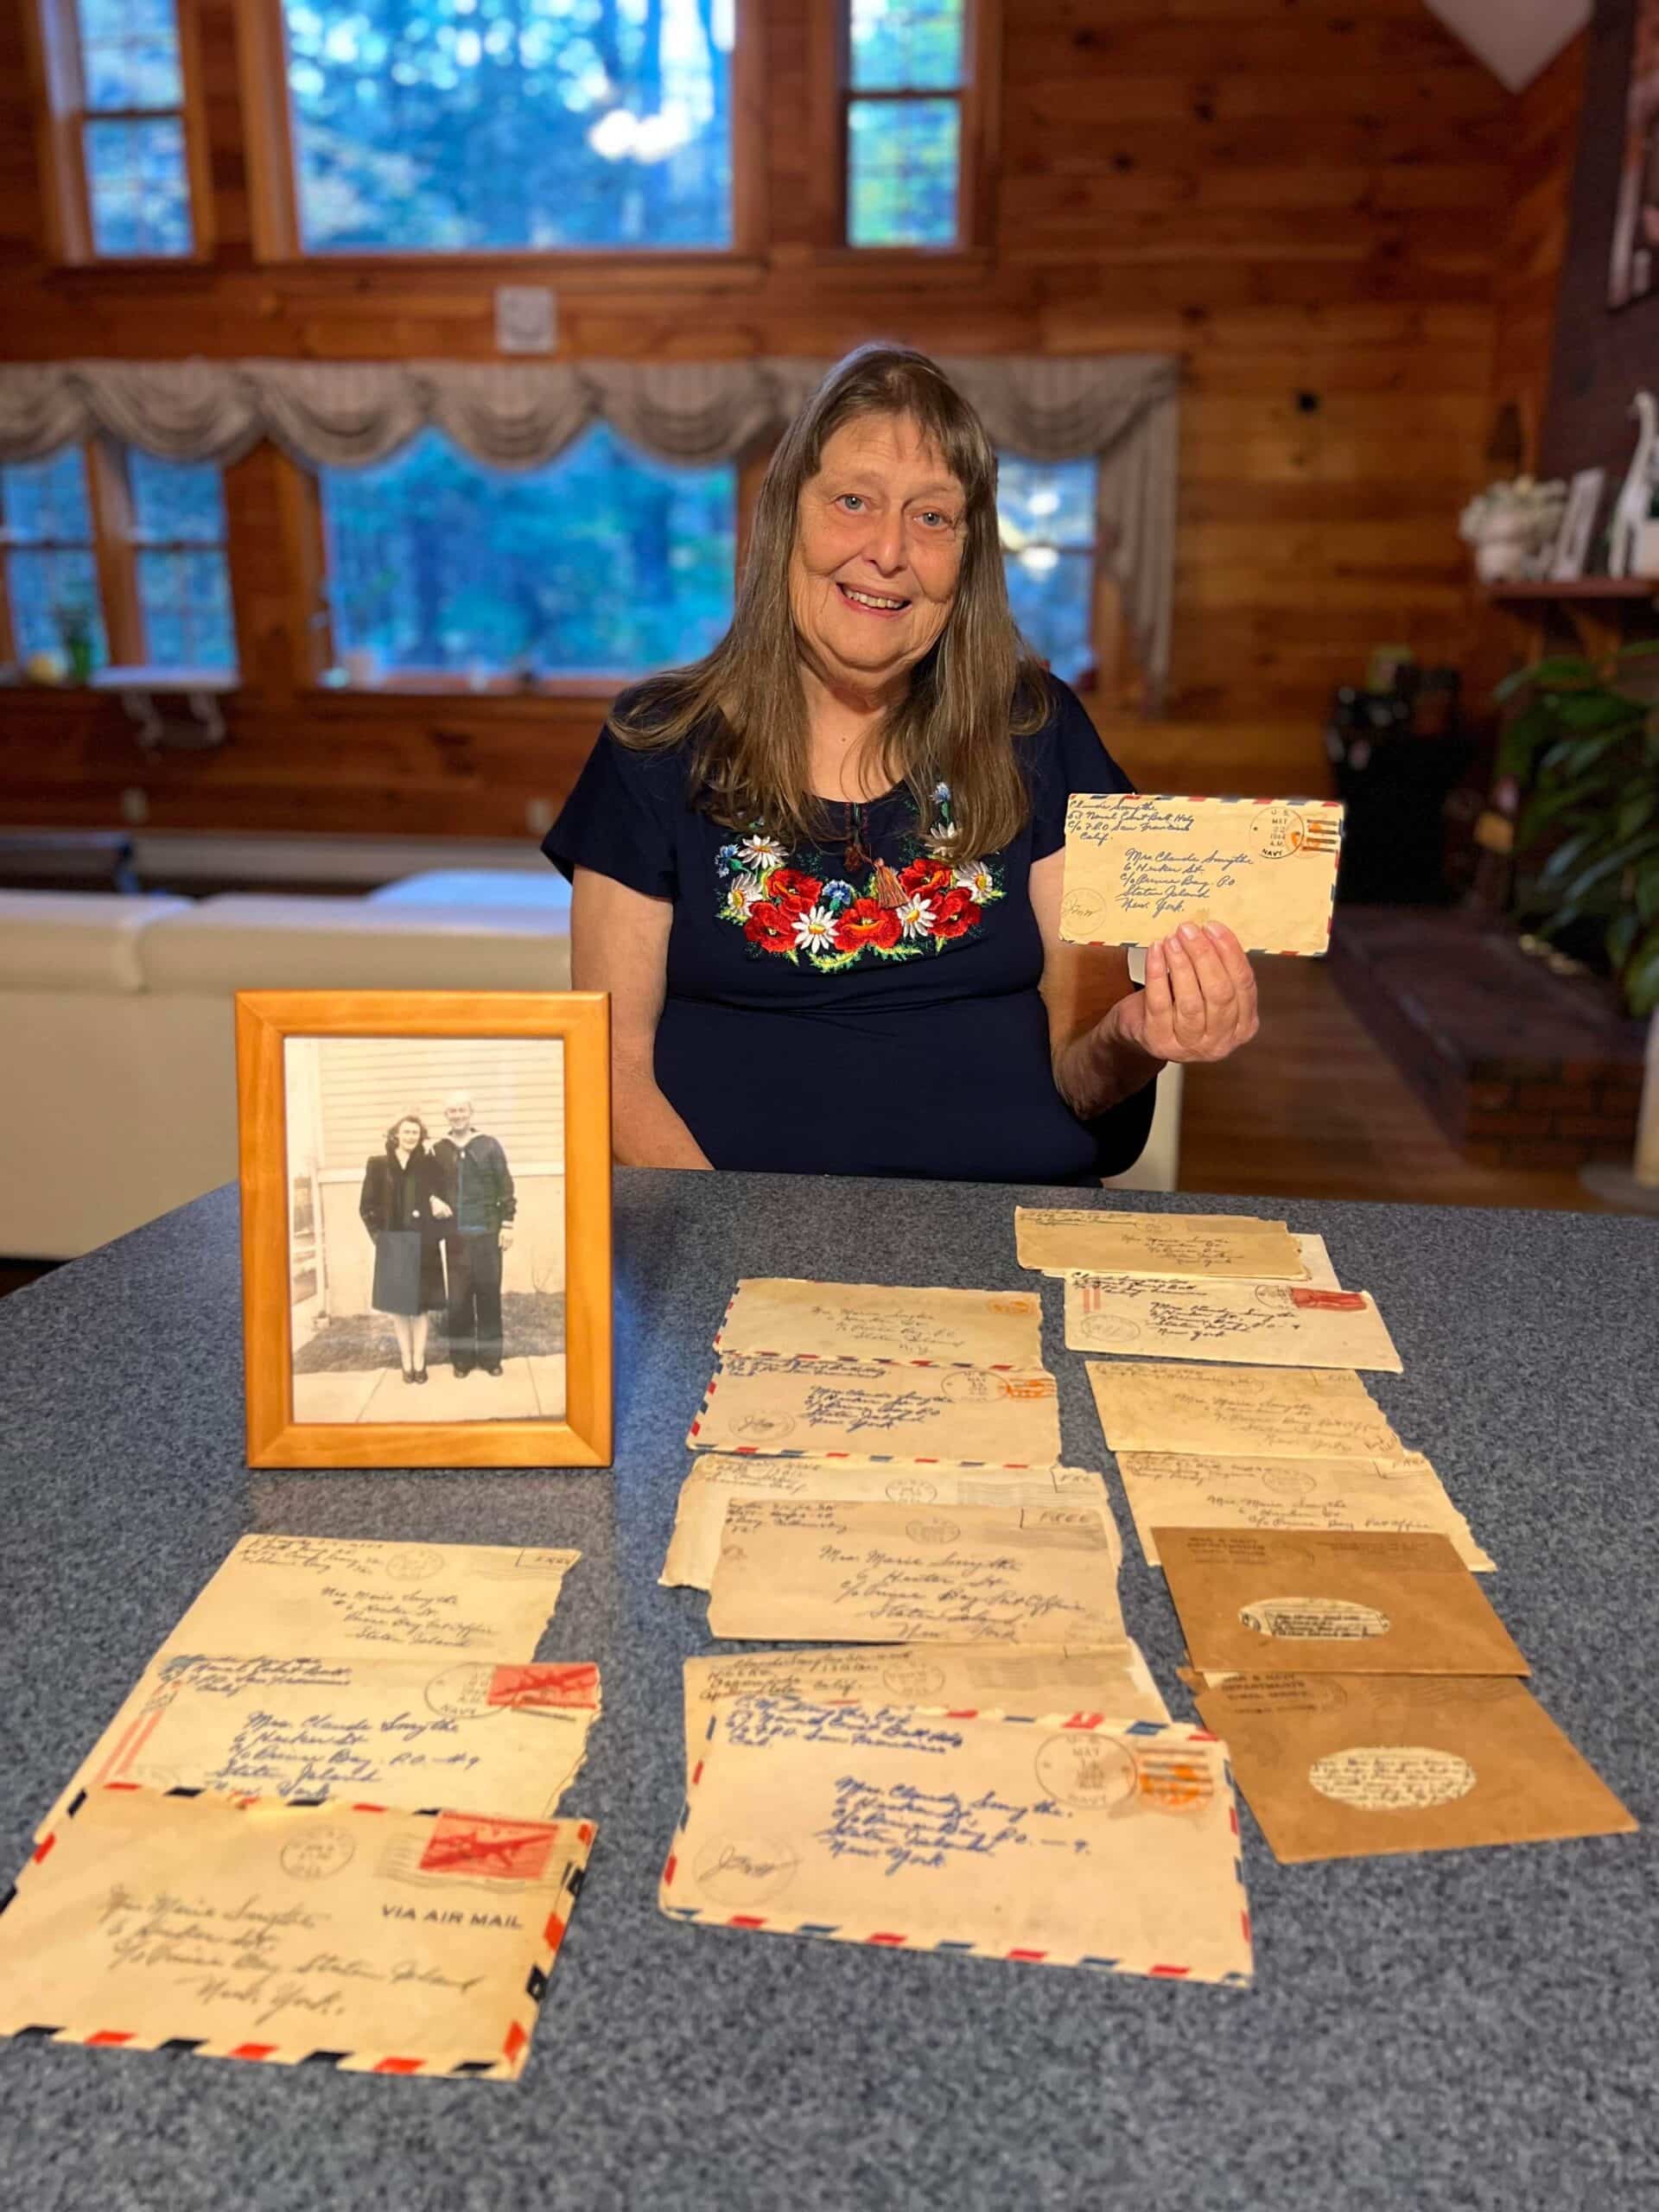 Carol holding the letters with a photo of her parents on the table